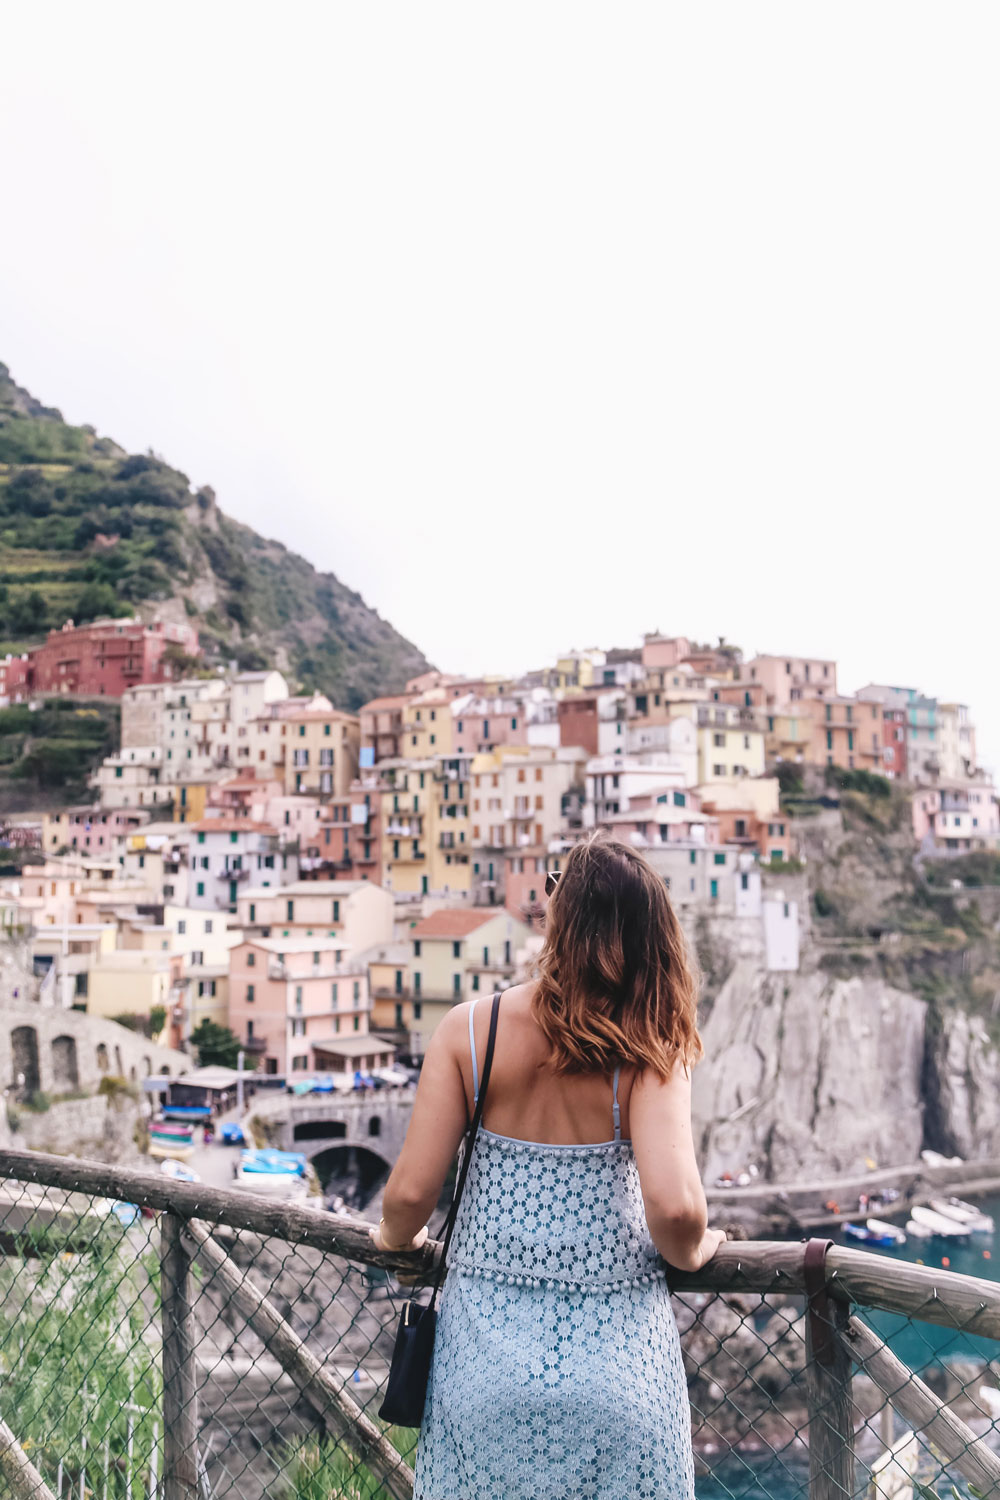 what to see in Cinque Terre, what to do in Cinque Terre, what to see in Riomaggiore, what to see in Riomaggiore, what to pack for Italy, best views in Cinque Terre, where to hike in Italy, where to hike in Cinque Terre, monterosso al mare hike, Vernazza hike, views of Vernazza, where to stay in Cinque Terre, Manarola travel guide, Manarola tourism guide, Manarola Italy, Manarola views by To Vogue or Bust